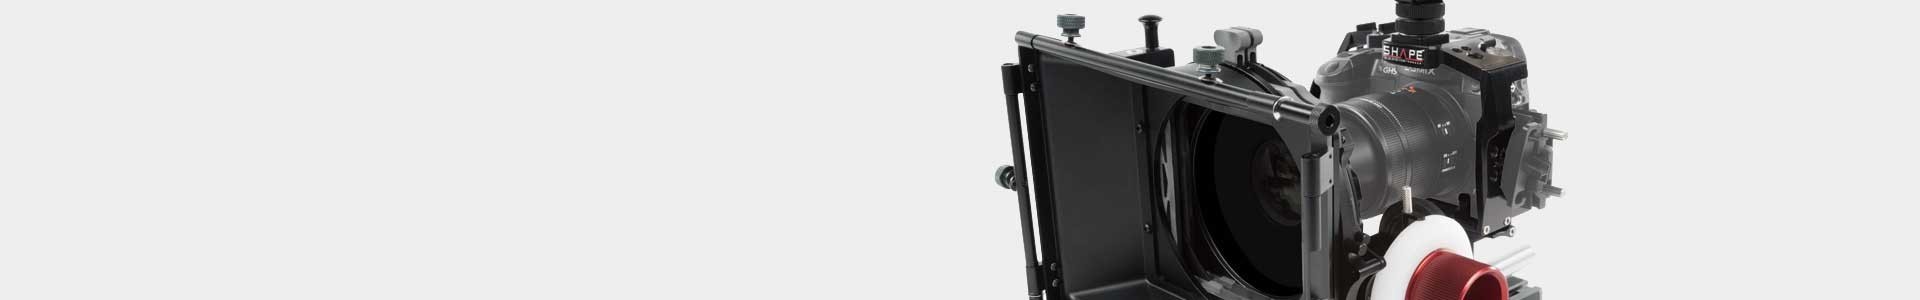 Accessories for DSLR Cameras at Avacab Audiovisual